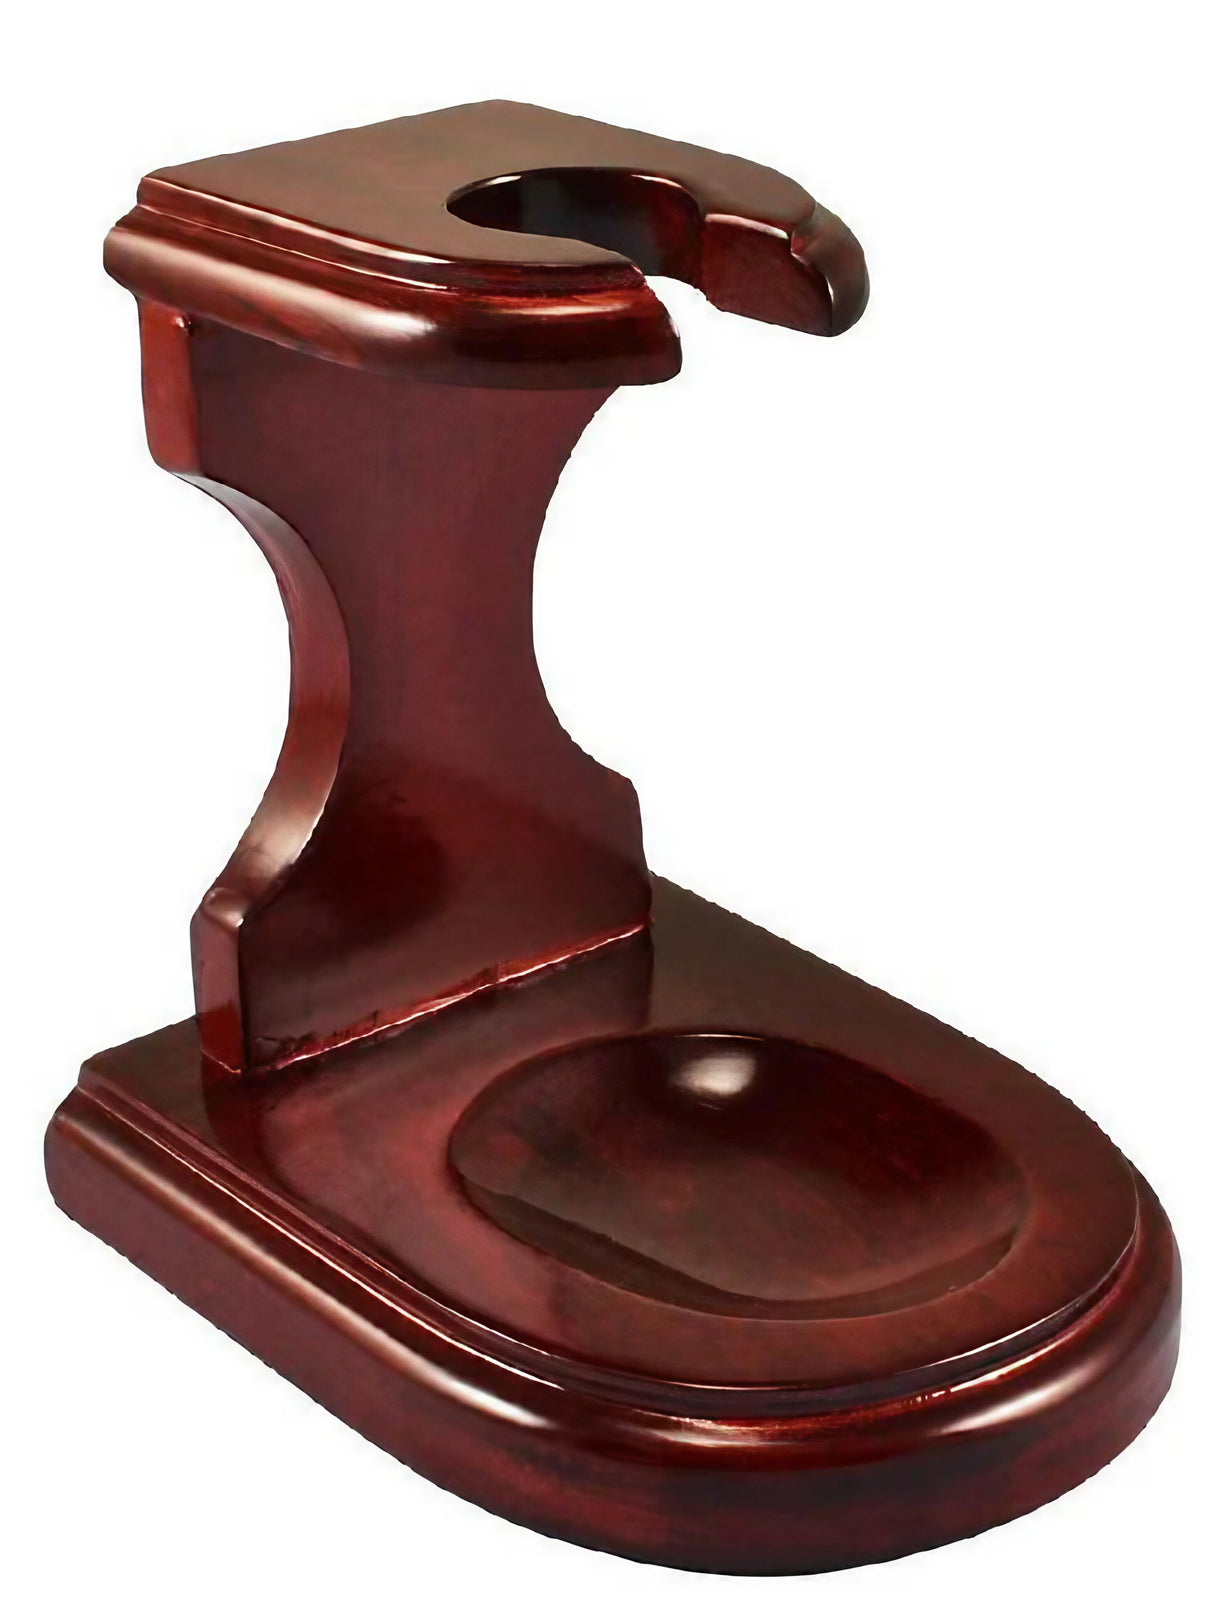 Pulsar Rosewood Pipe Stand in elegant design, showcasing front view on a white background